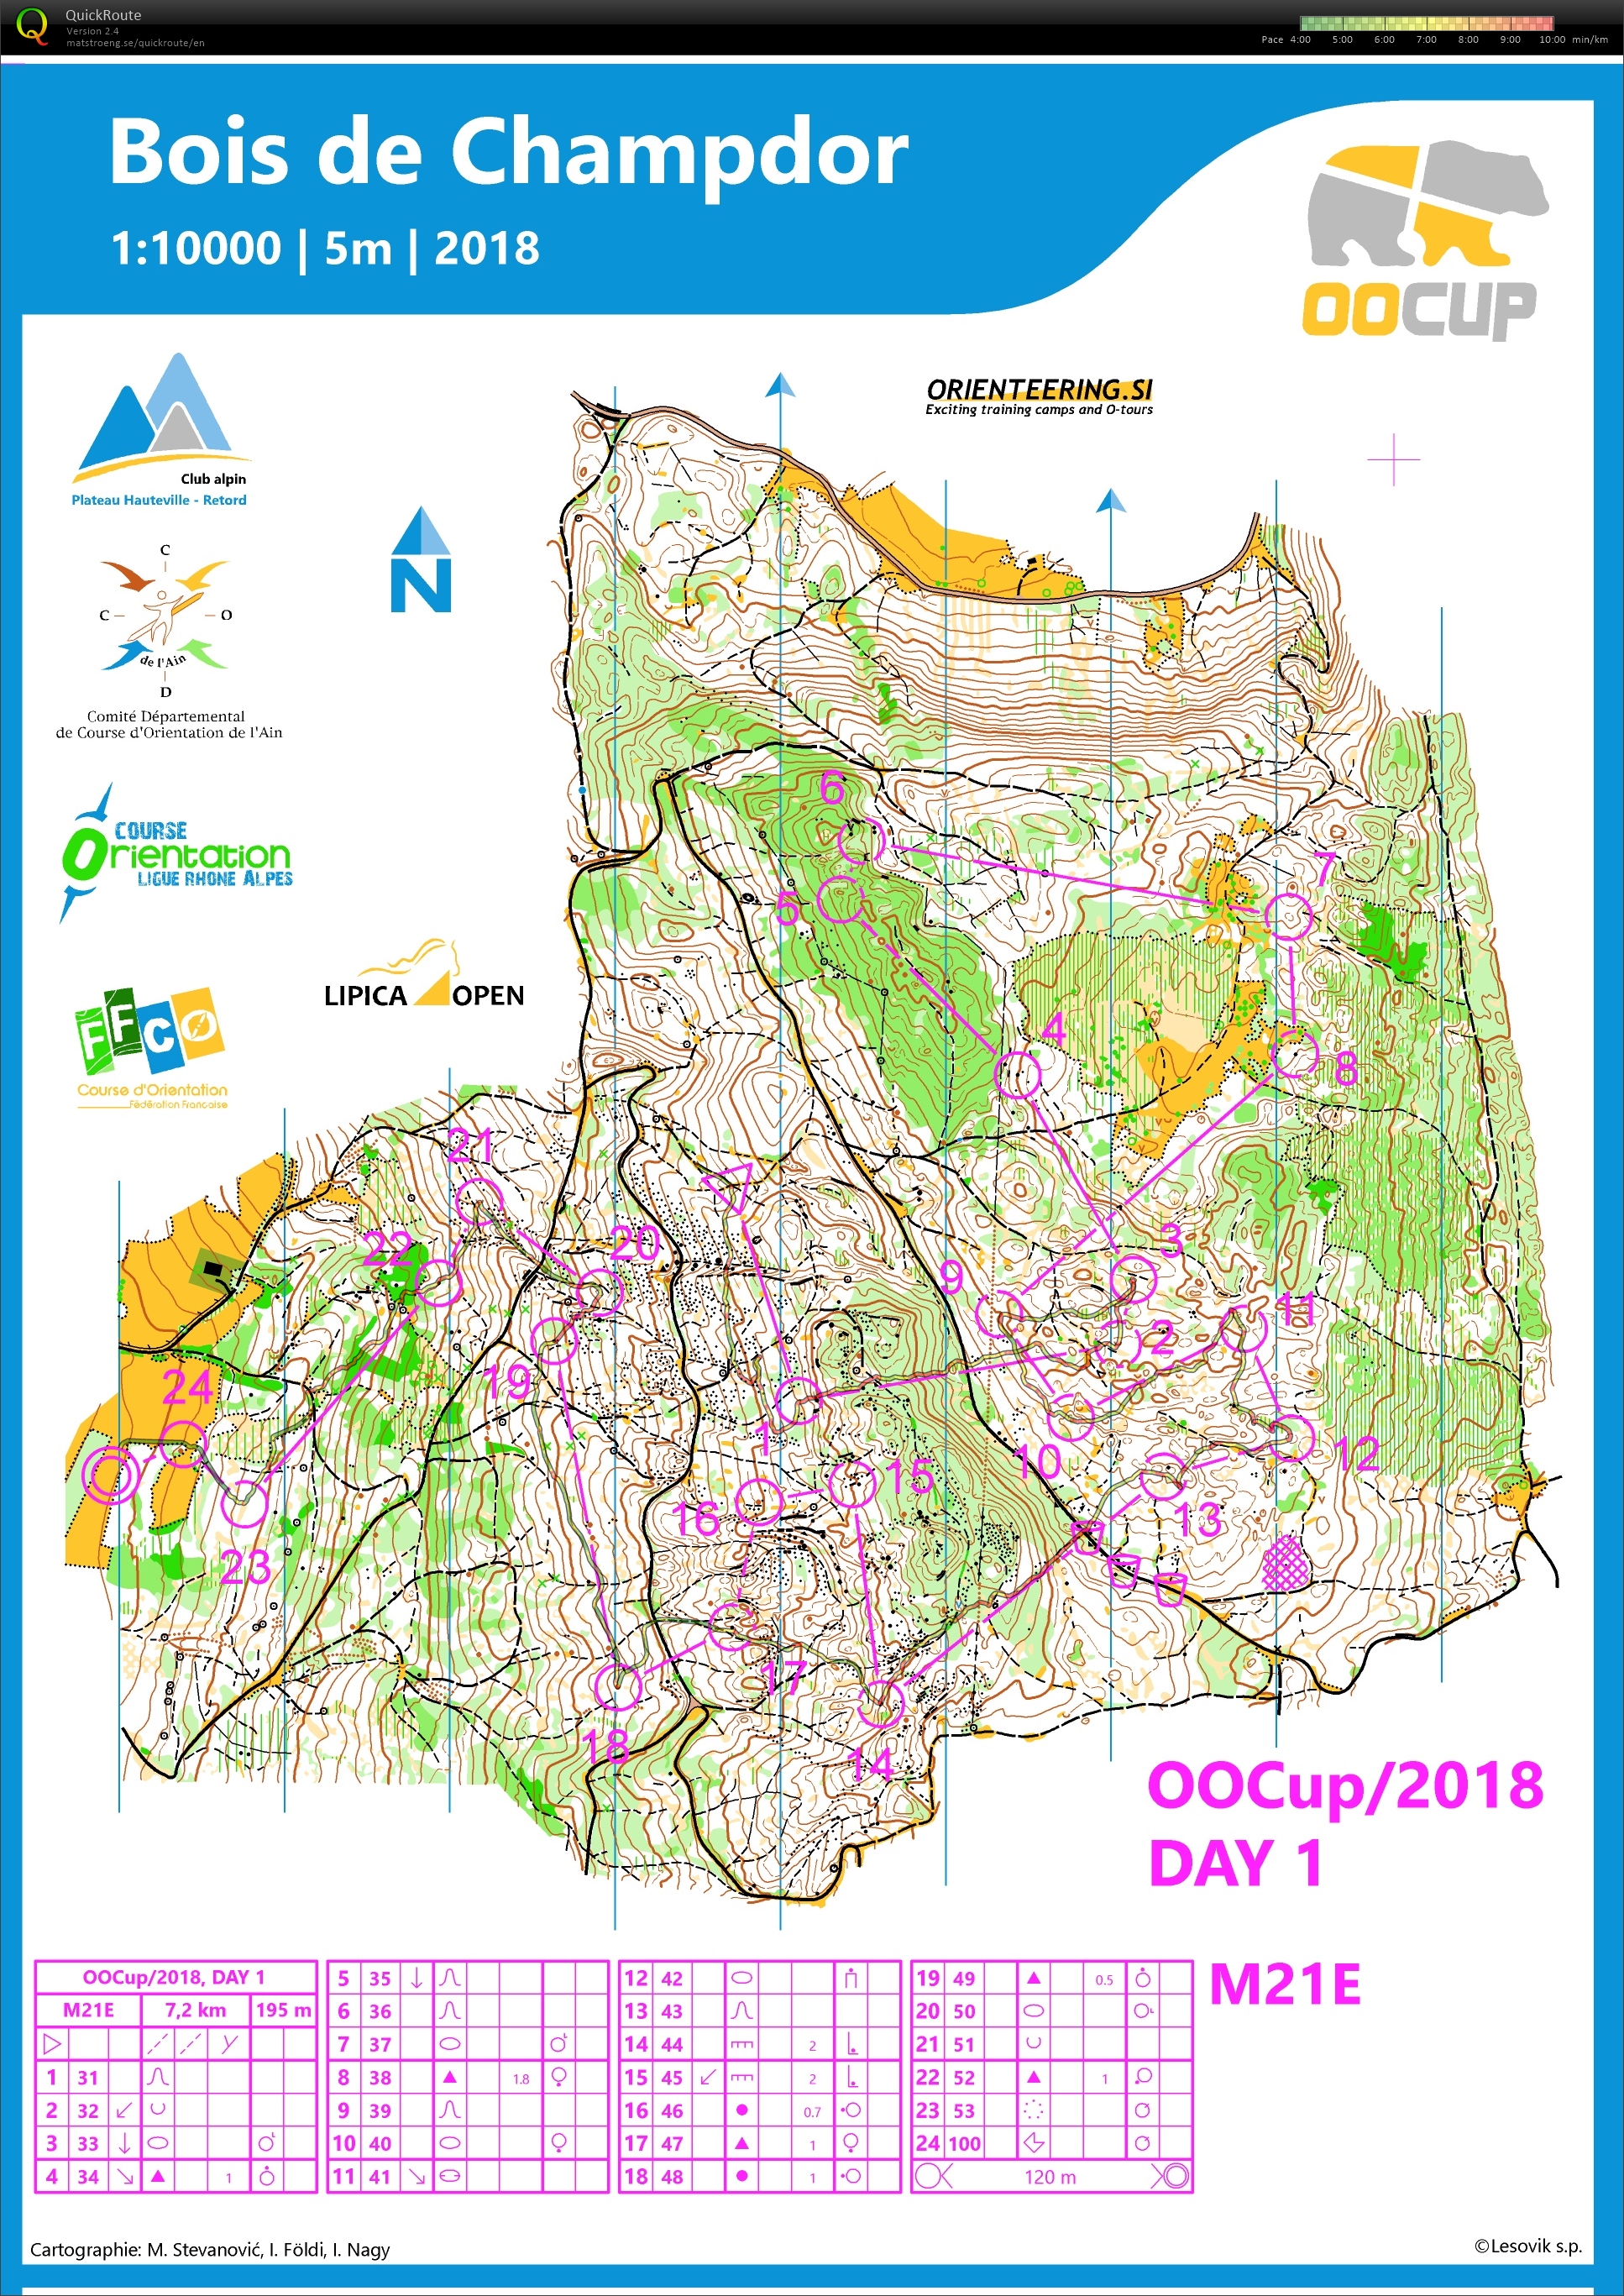 OOcup - day1 (25.07.2018)